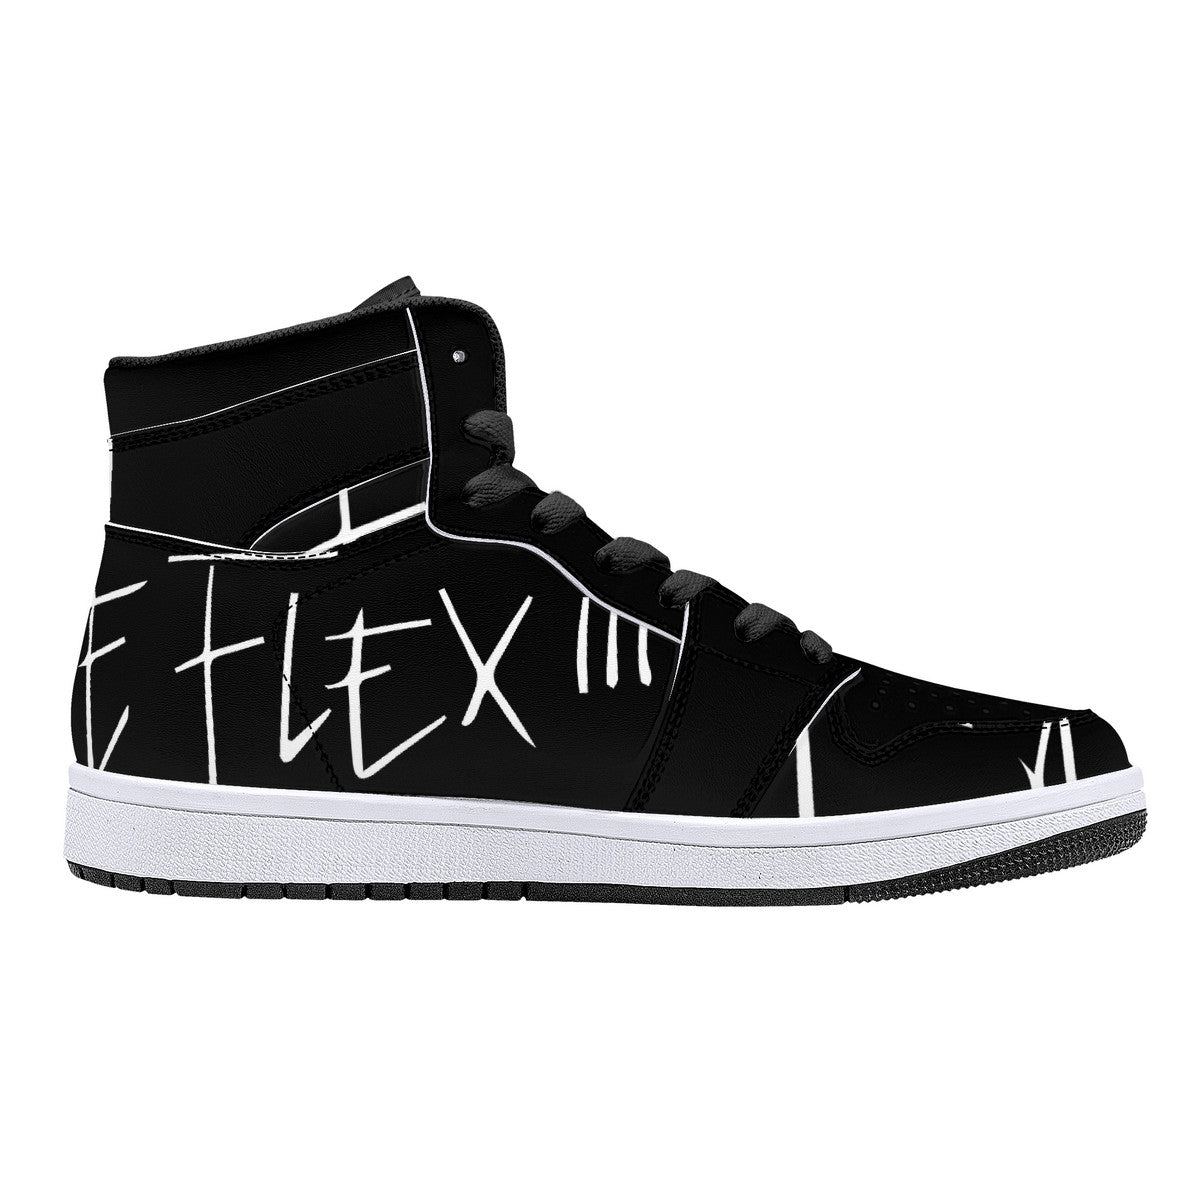 Flex Power | Customized Business Shoes V1 Sneakers